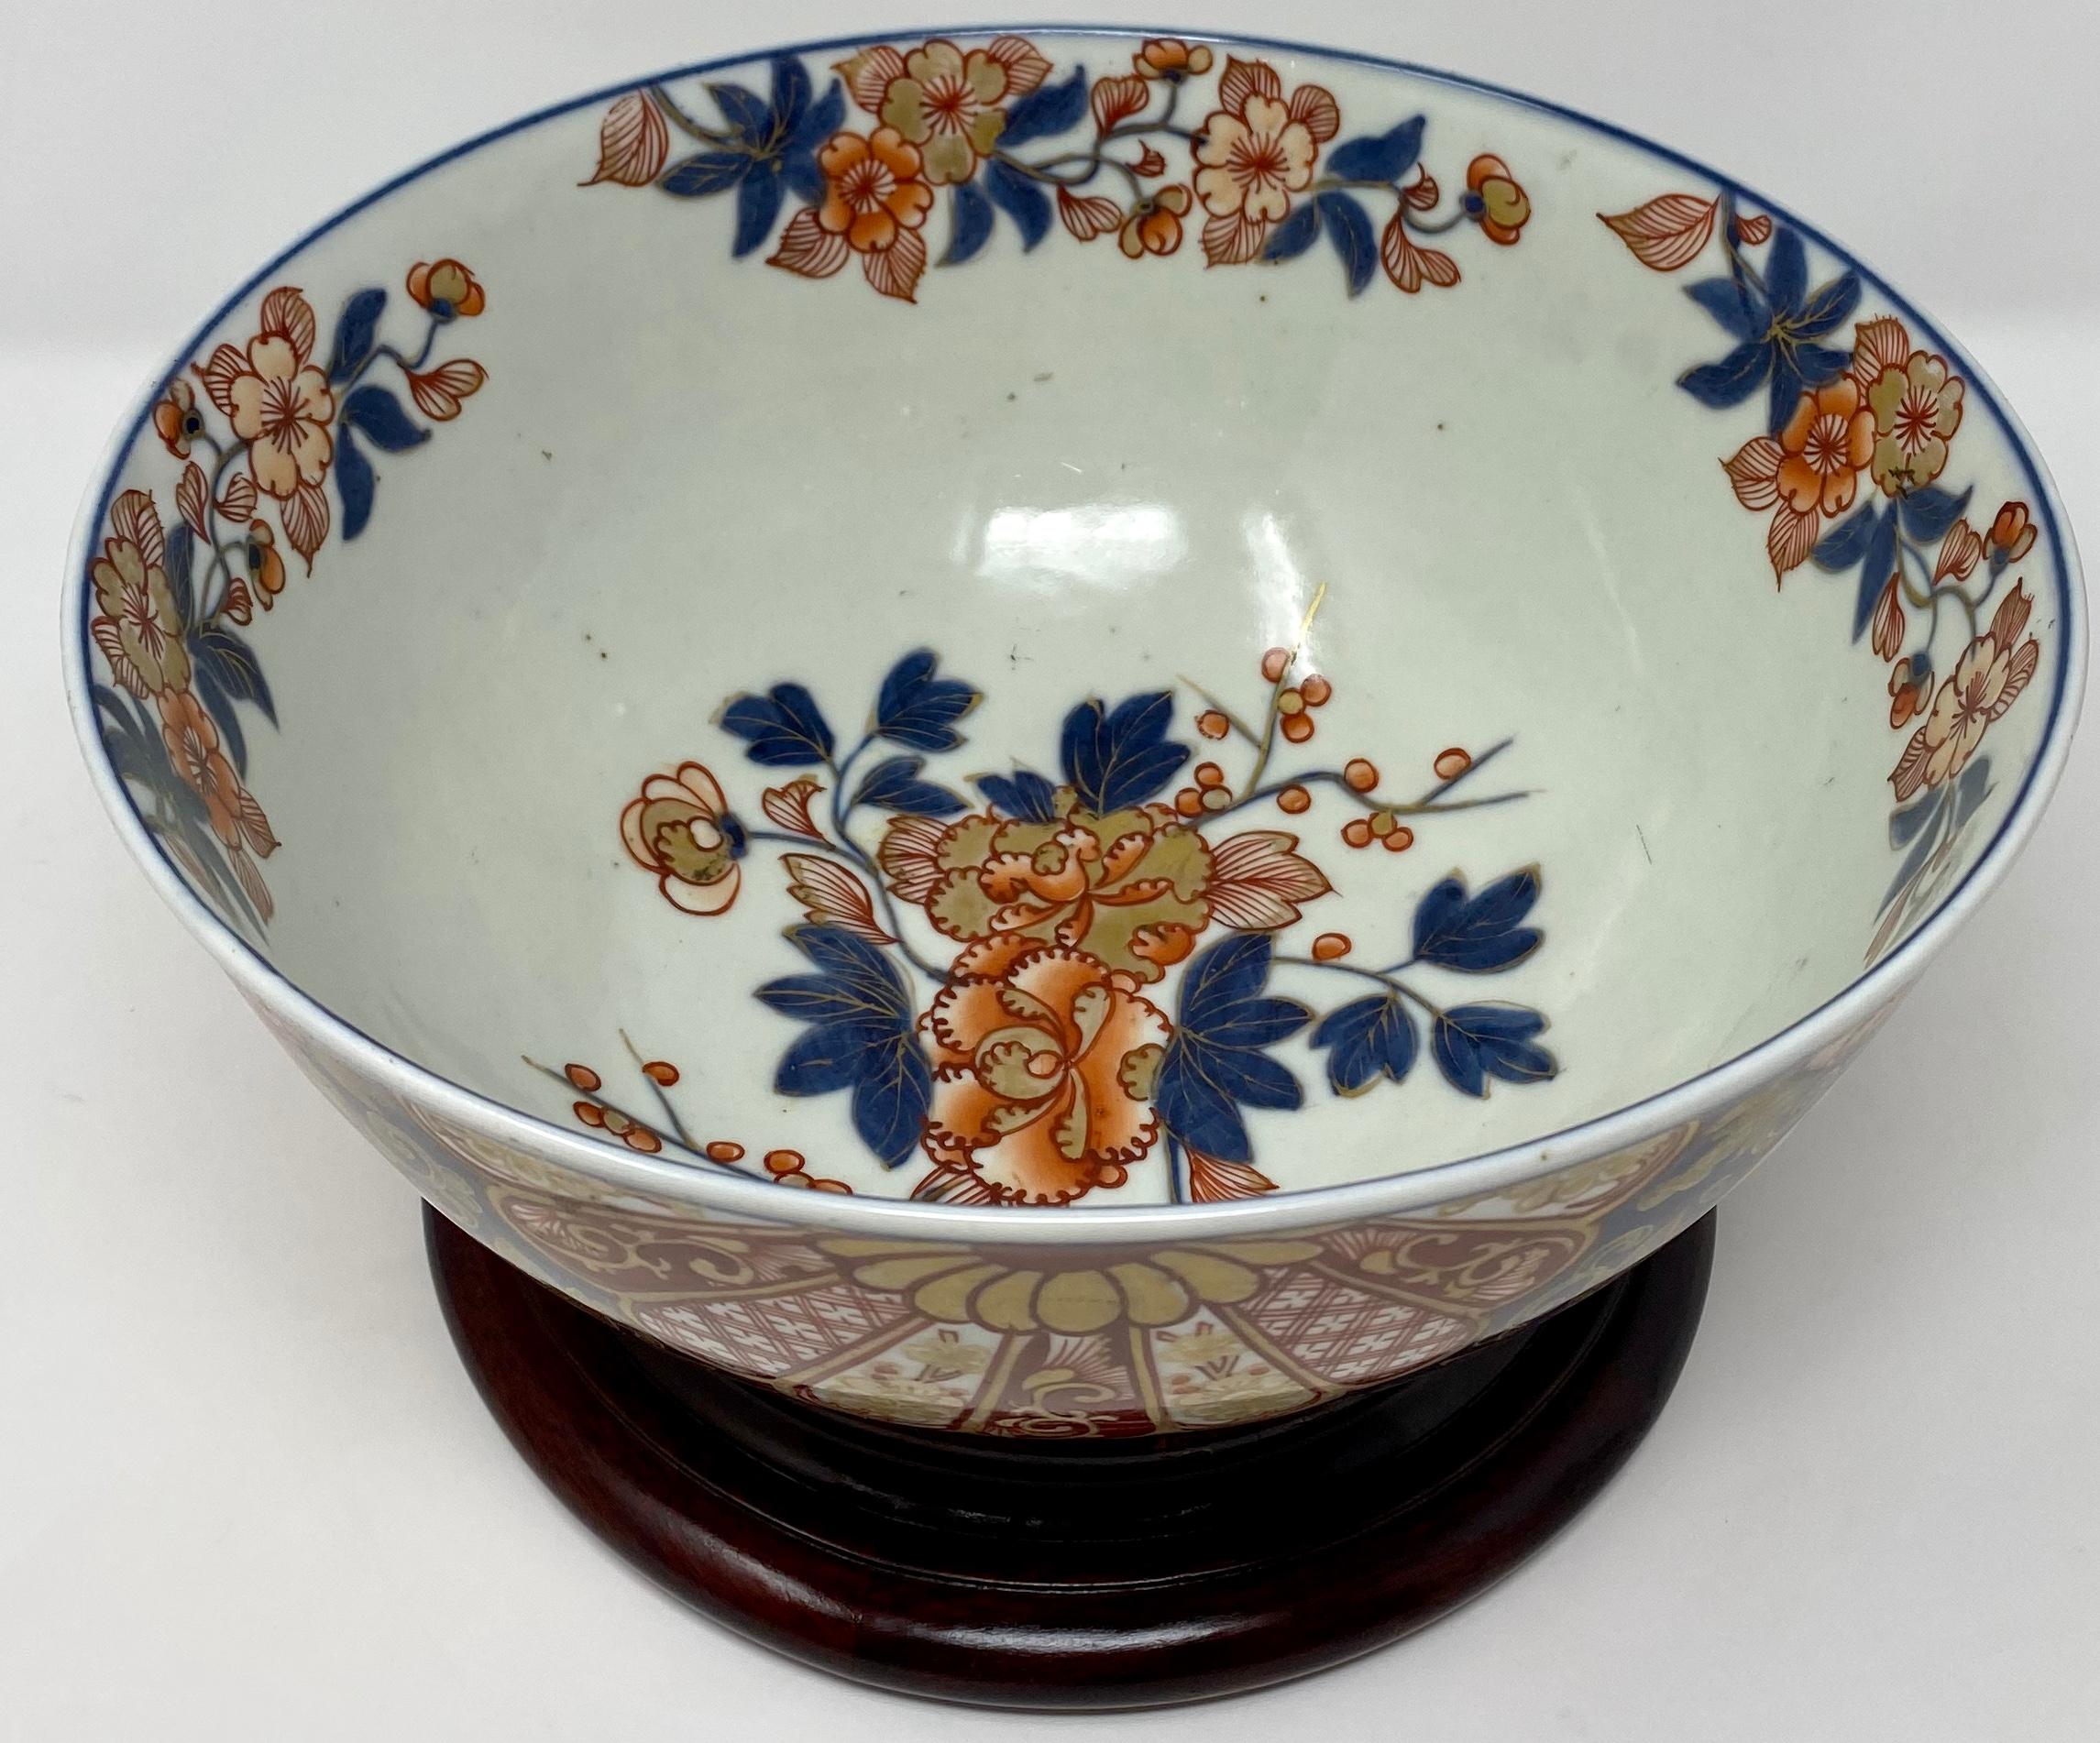 Fans of Imari will enjoy seeing the rich colors on this bowl. A very striking design.
